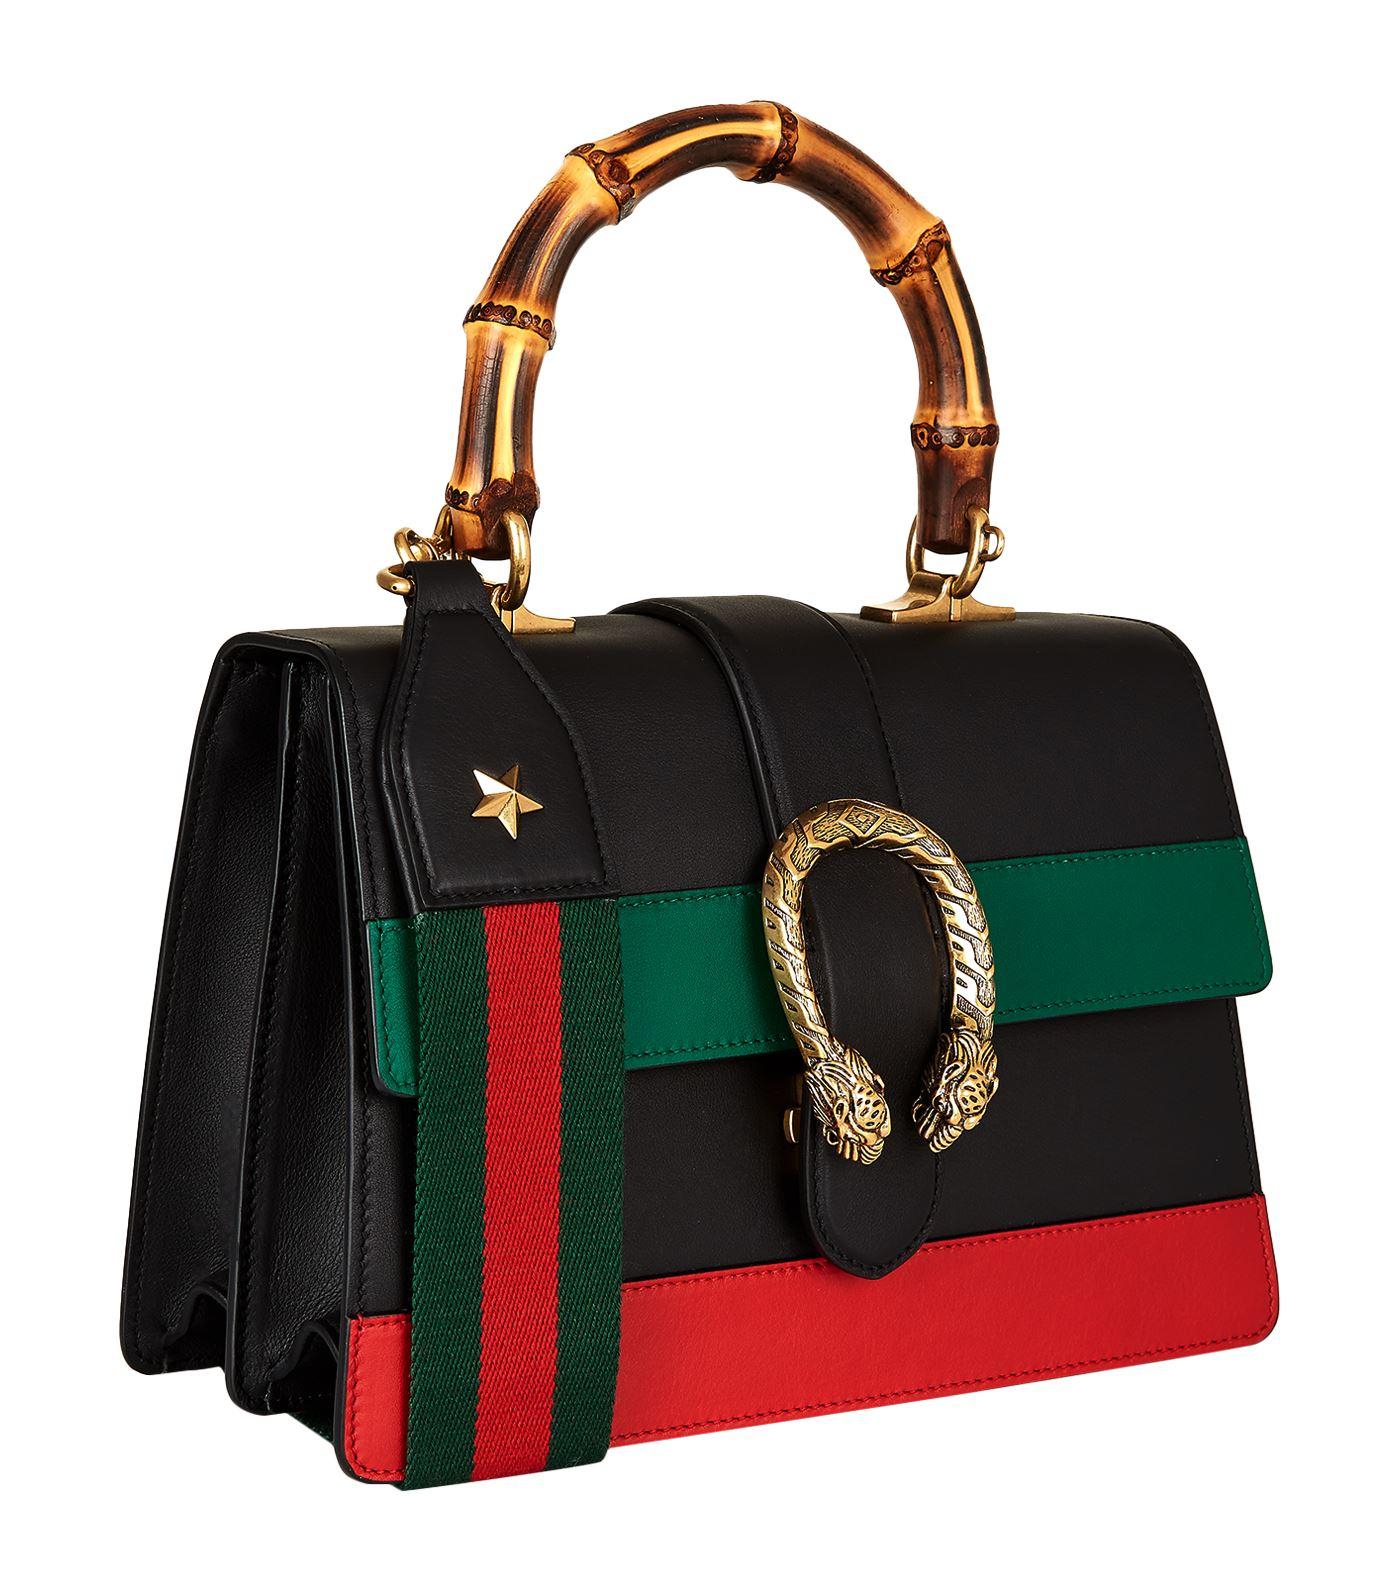 Lyst - Gucci Small Dionysus Stripe Bamboo Handle Bag